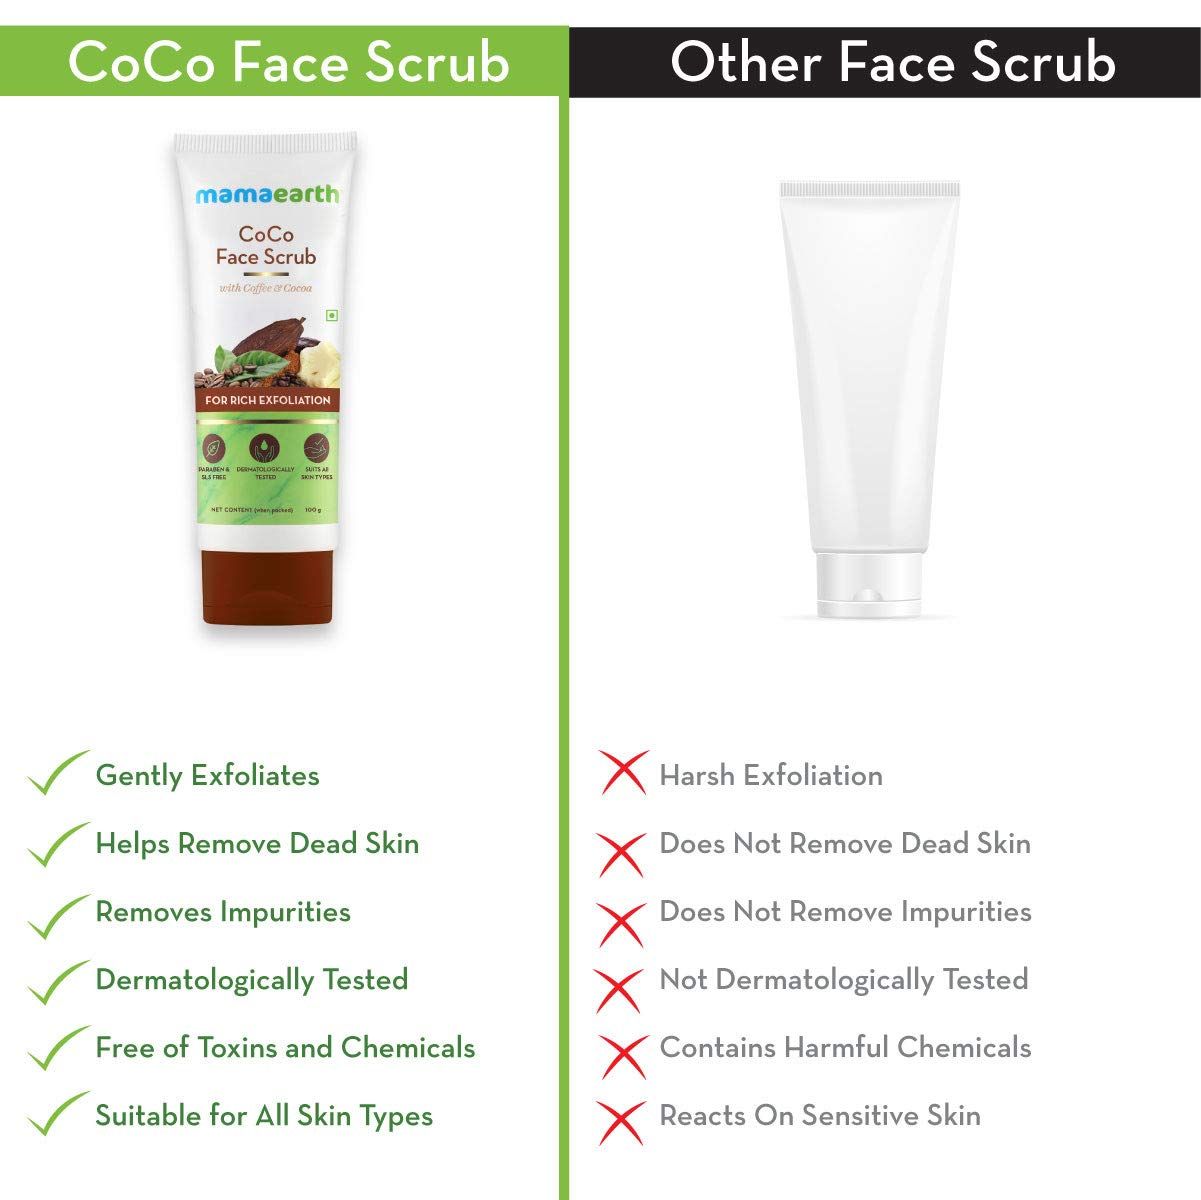 CoCo Face Mask with Coffee and Cocoa for Skin Awakening - 100g